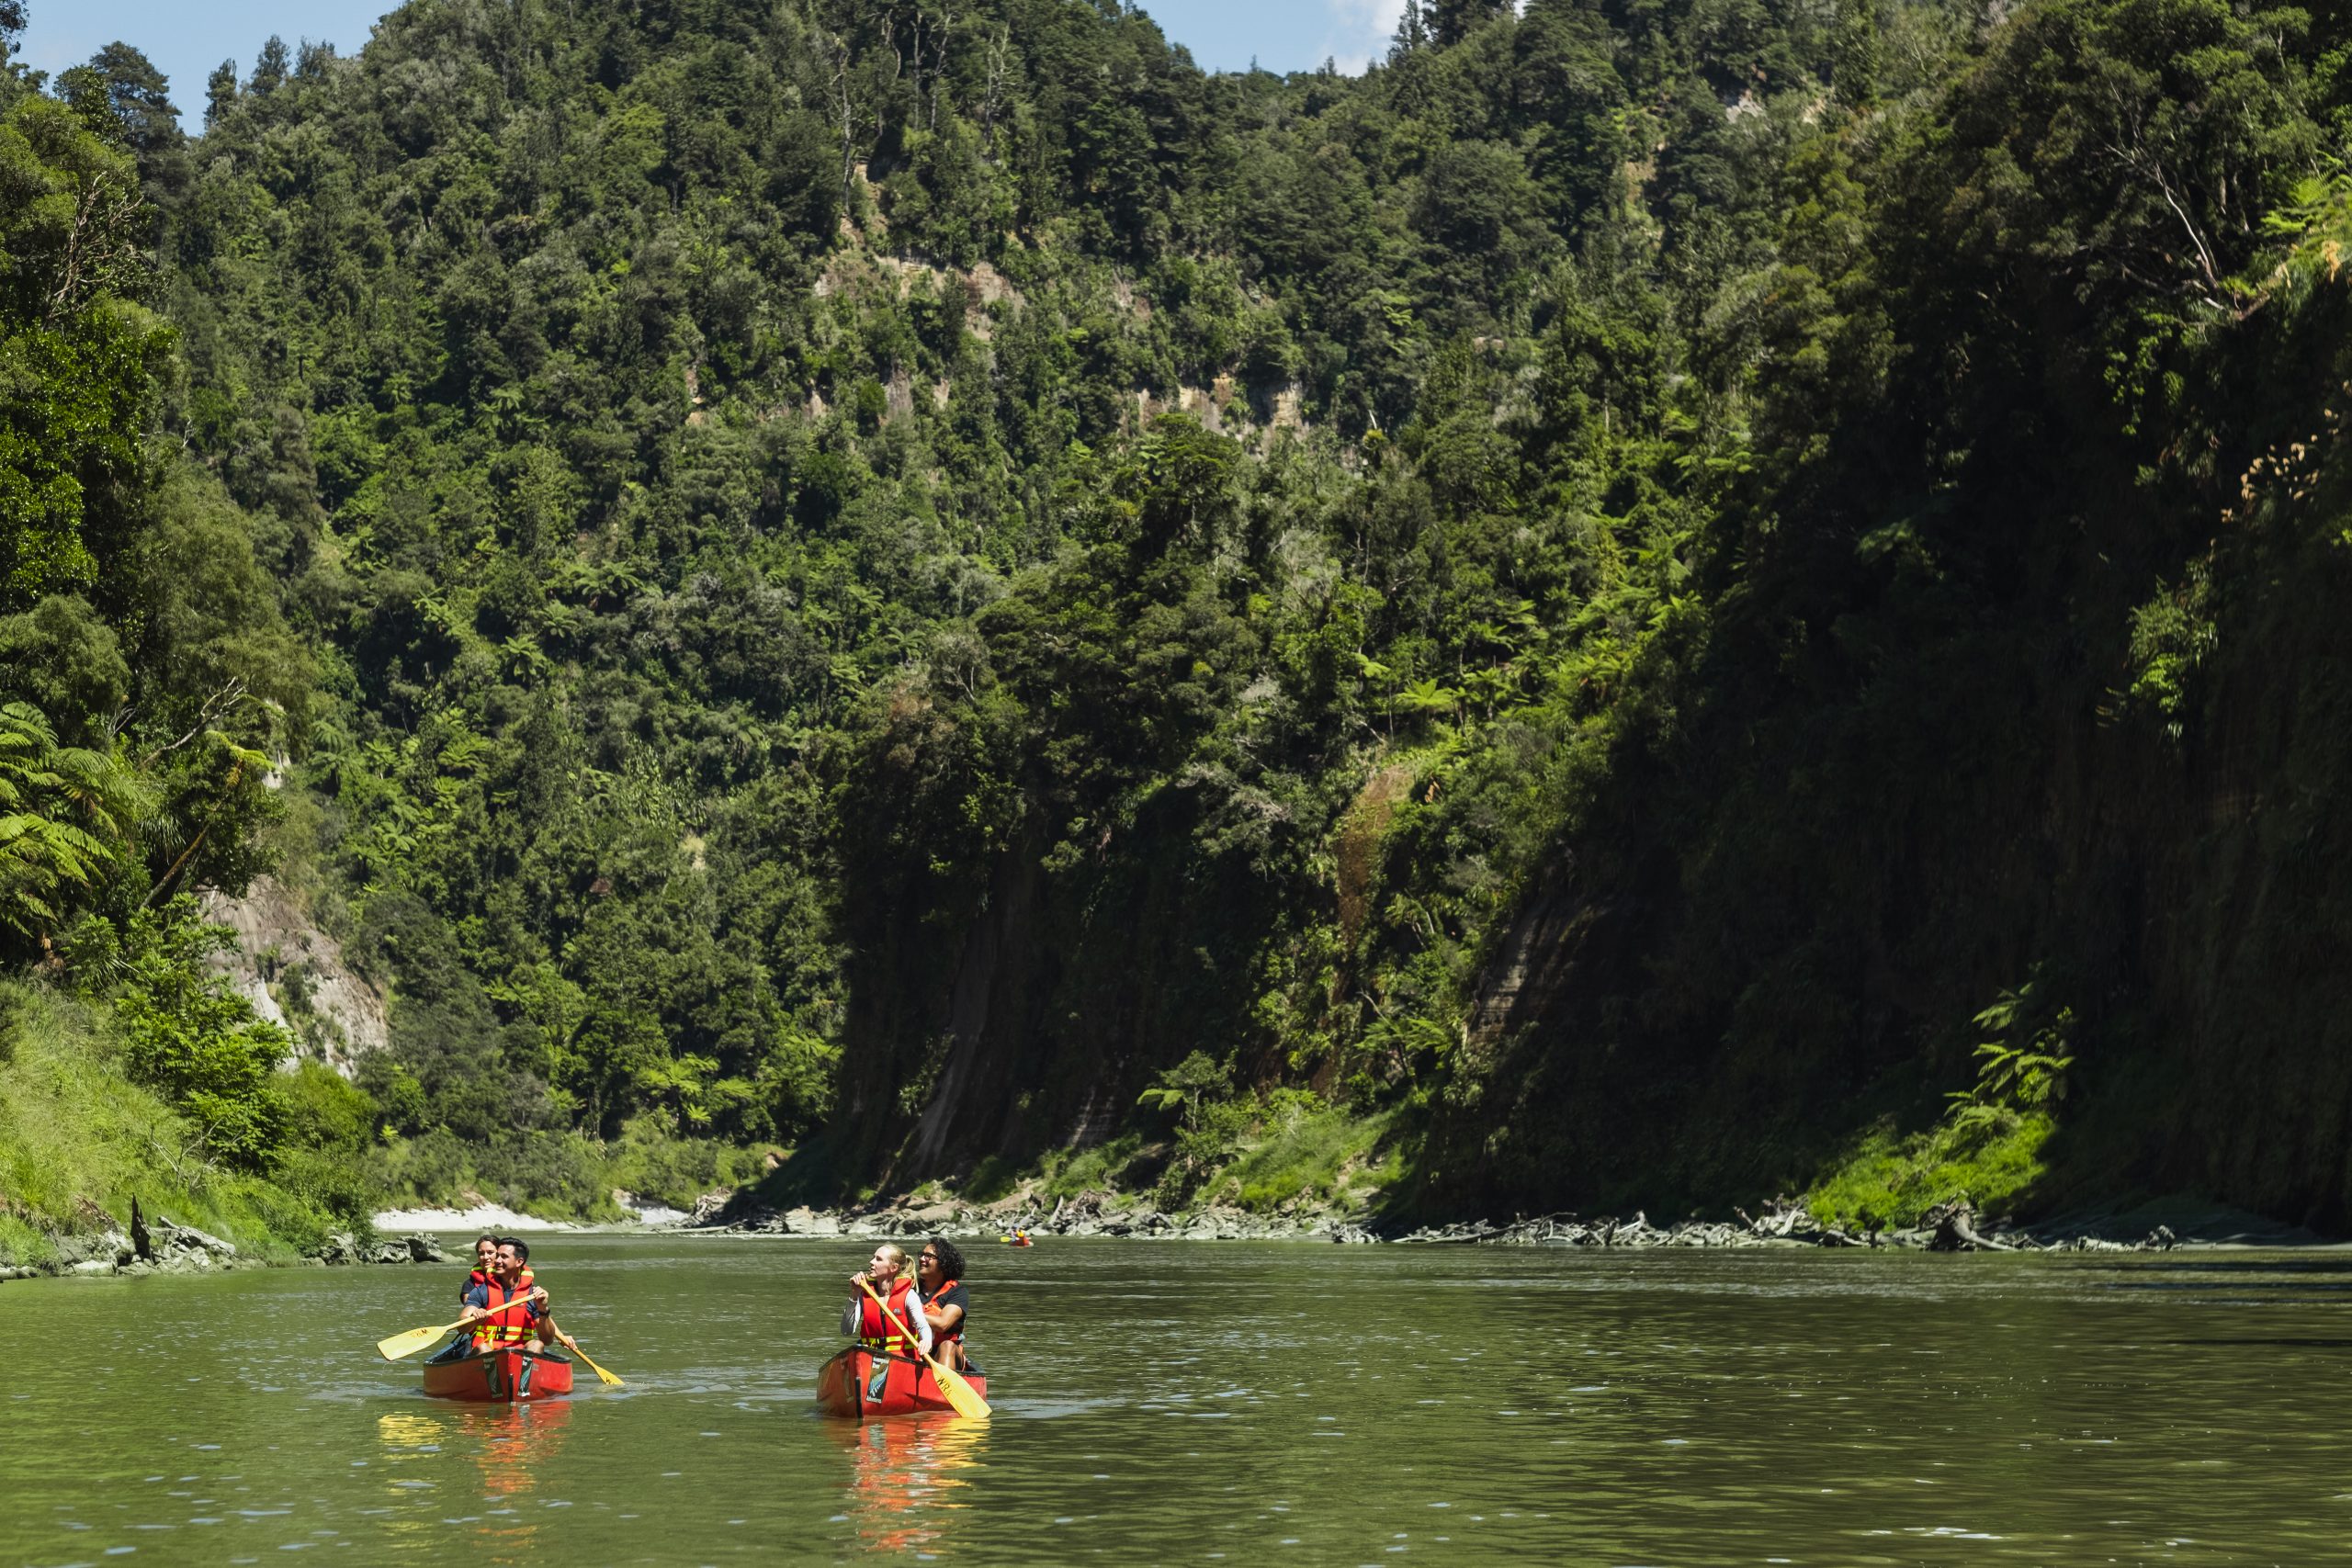 People in two canoes paddling down the Whanganui River